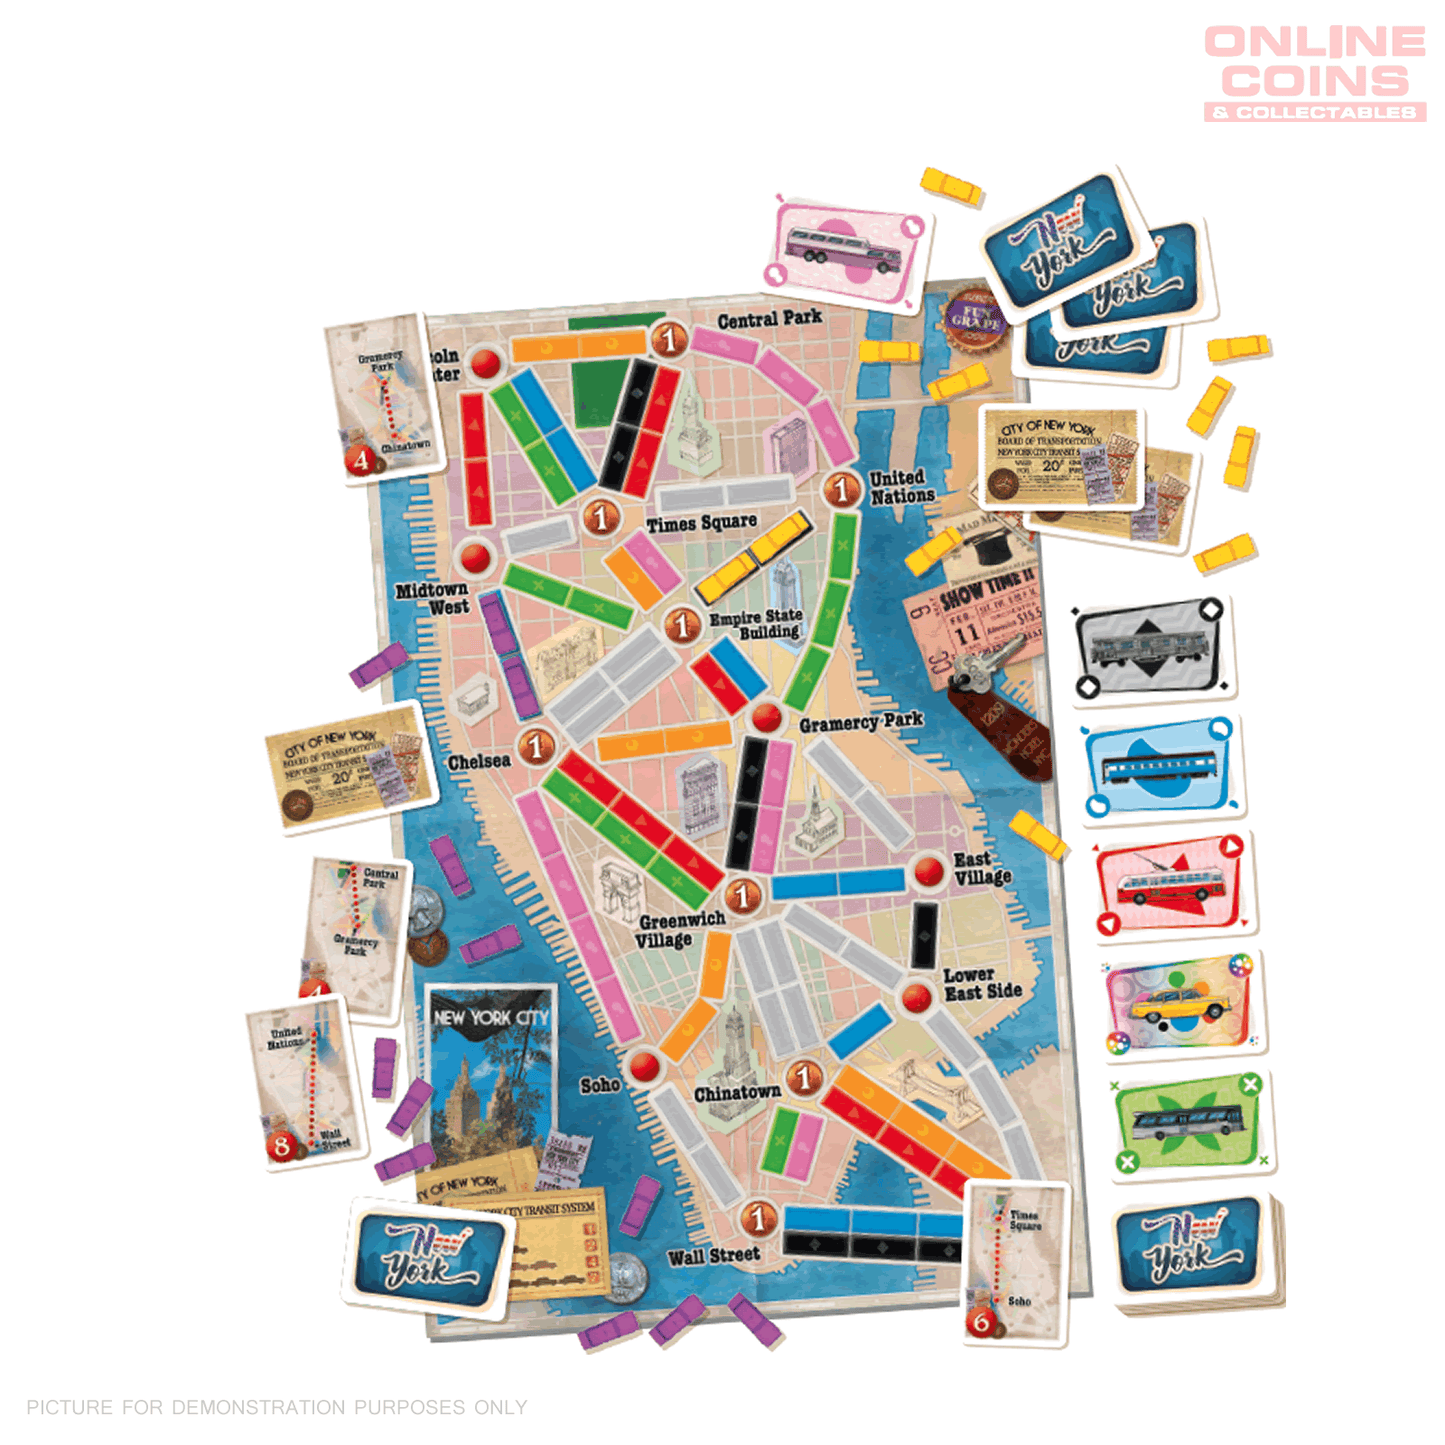 Ticket to Ride - New York Edition